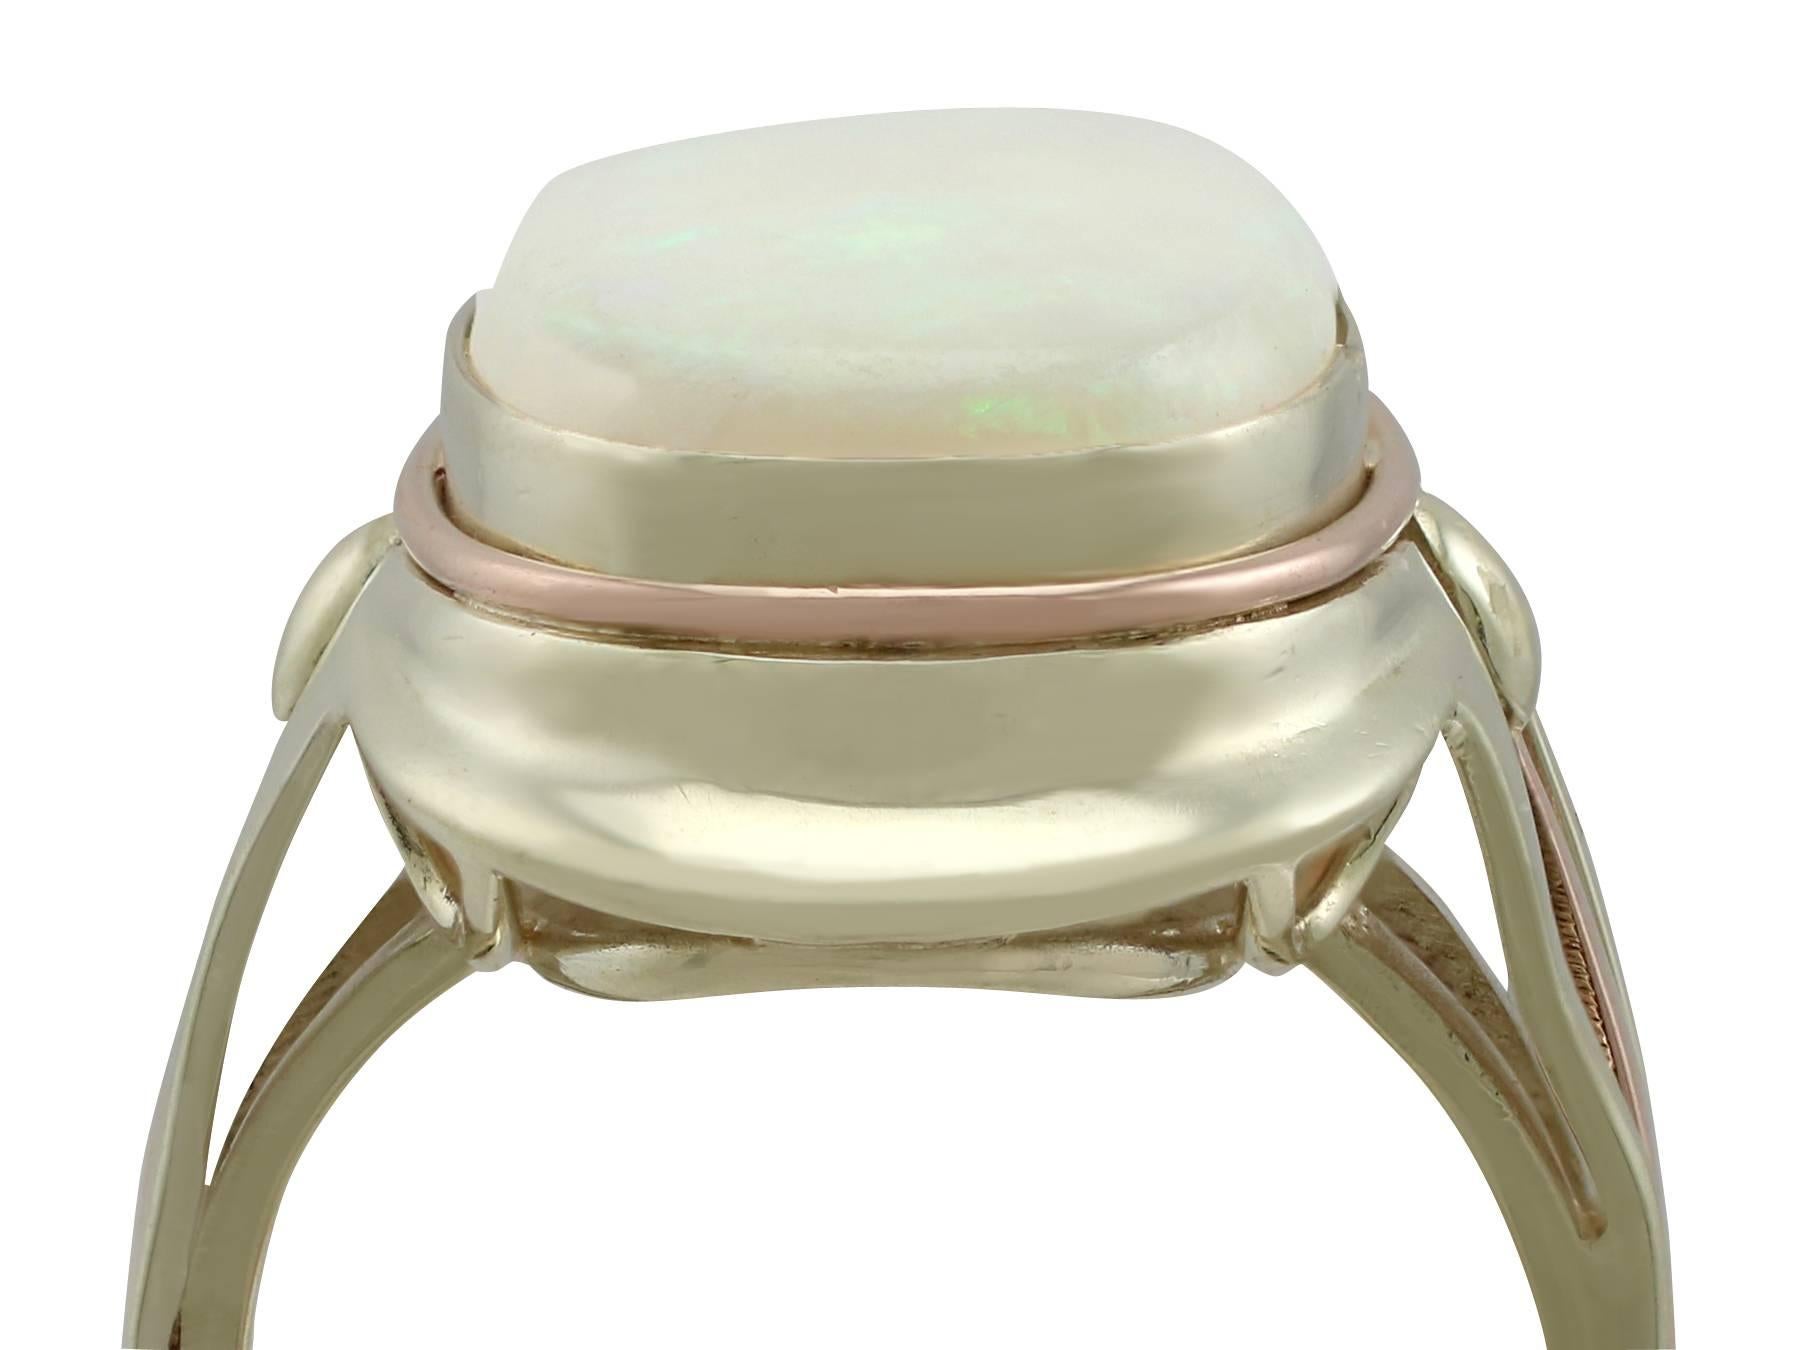 An impressive 6.91 carat white opal and 14 karat yellow gold, 14 karat rose gold cocktail ring; part of our diverse vintage jewelry and estate jewelry collections

This fine and impressive large oval opal ring has been crafted in 14k yellow and rose